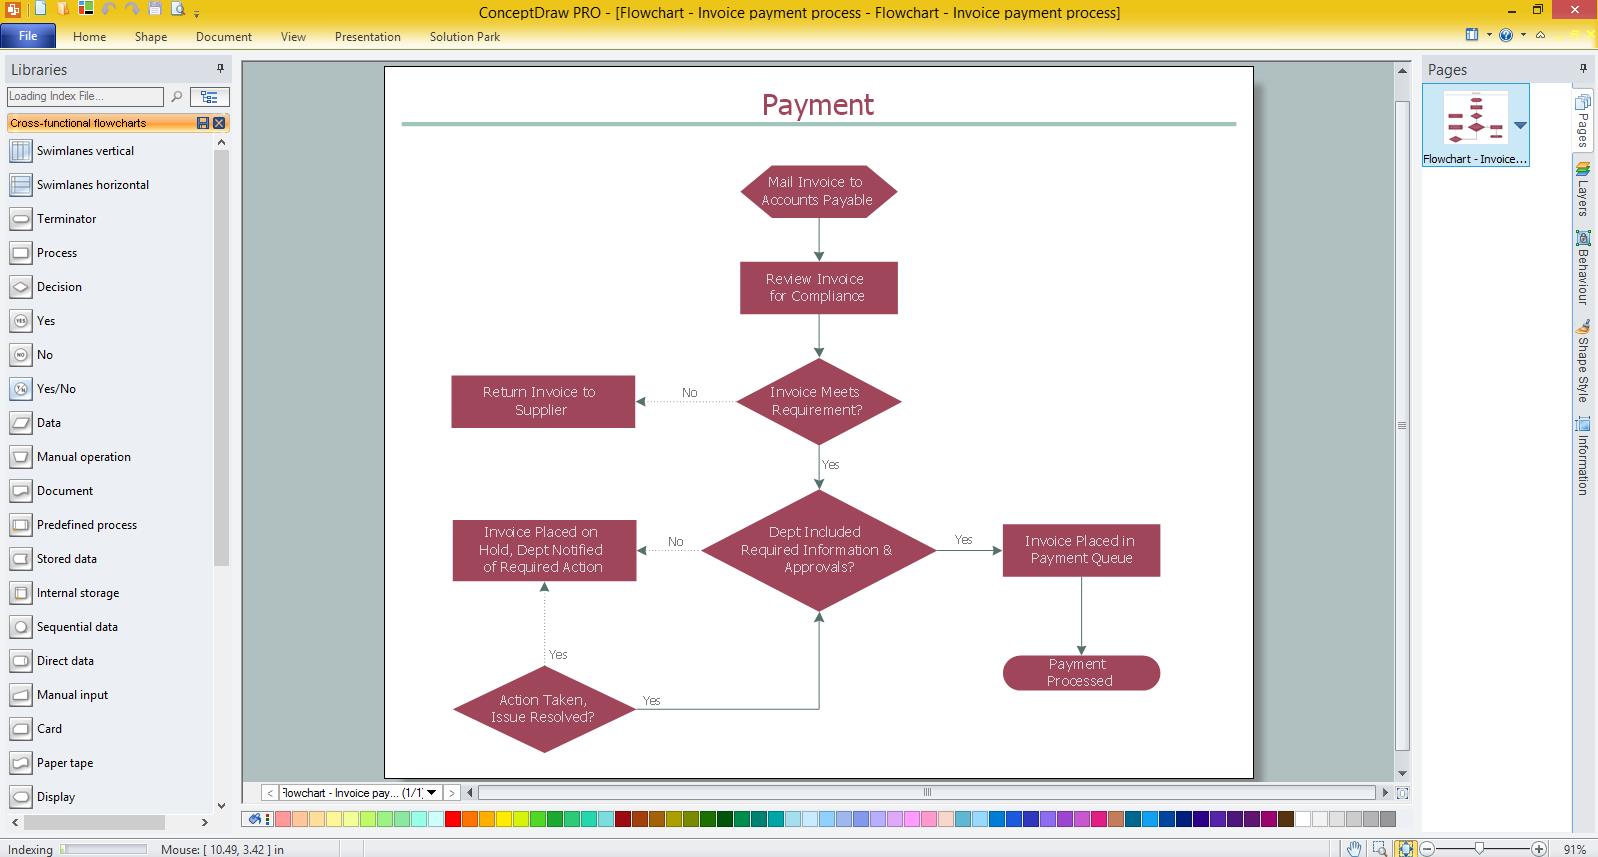 Flowchart for Payment